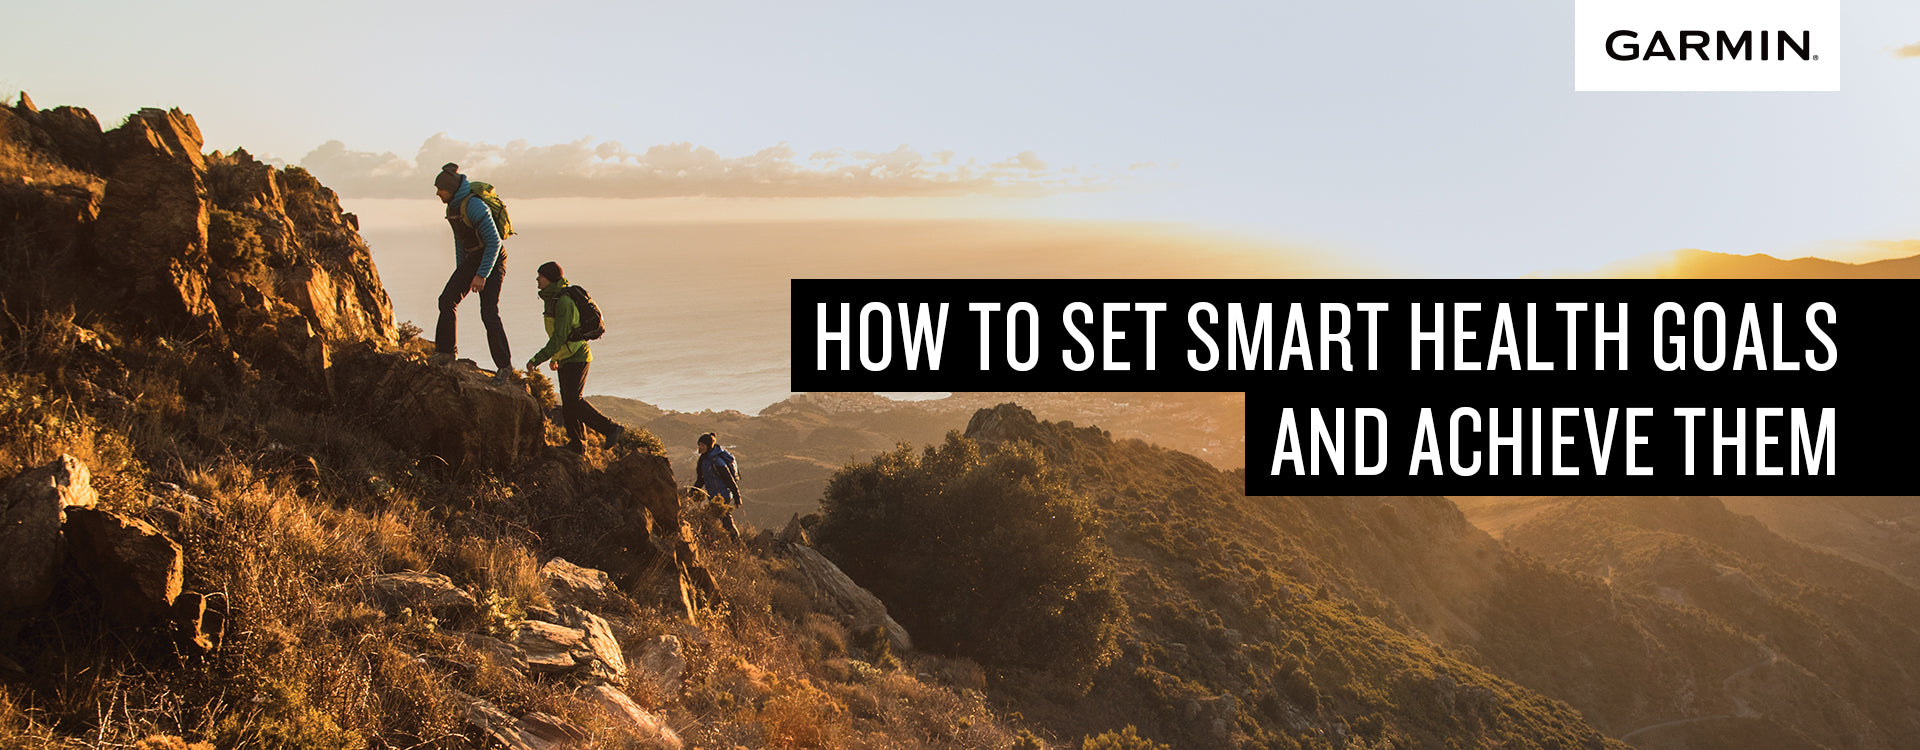 How to Set Smart Health Goals and Achieve Them